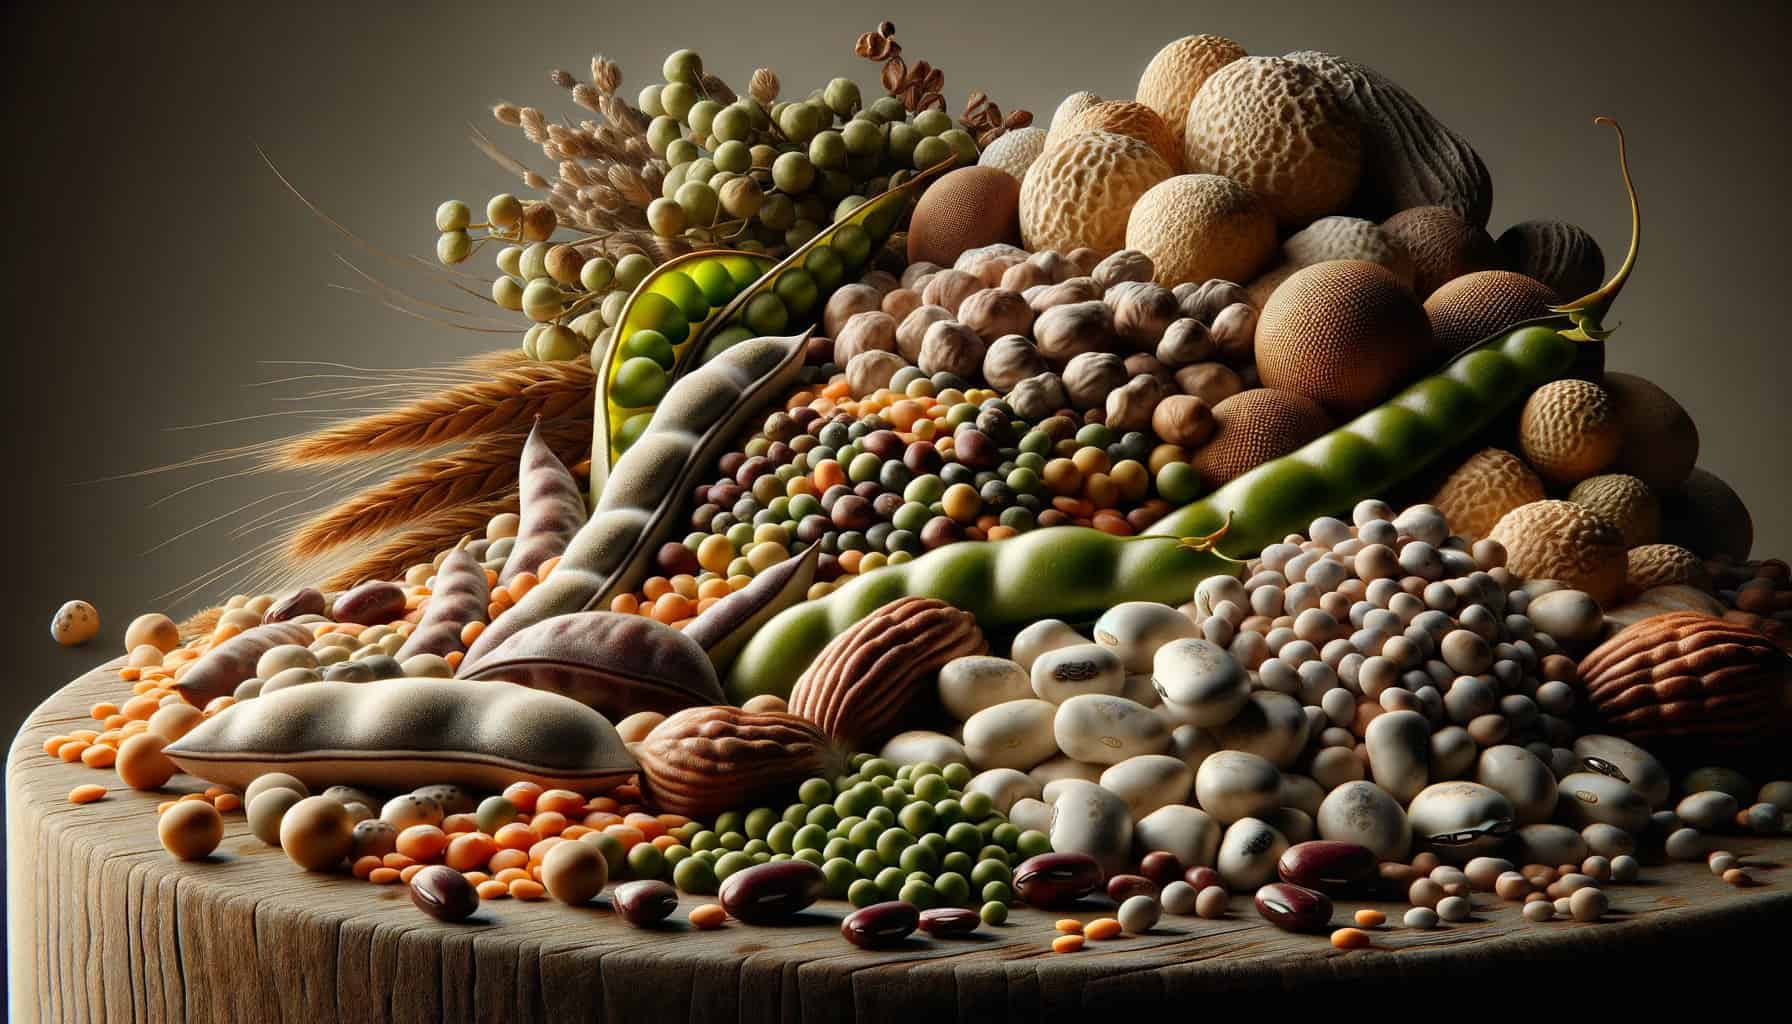 Variety of legumes, including beans, peas, and lentils